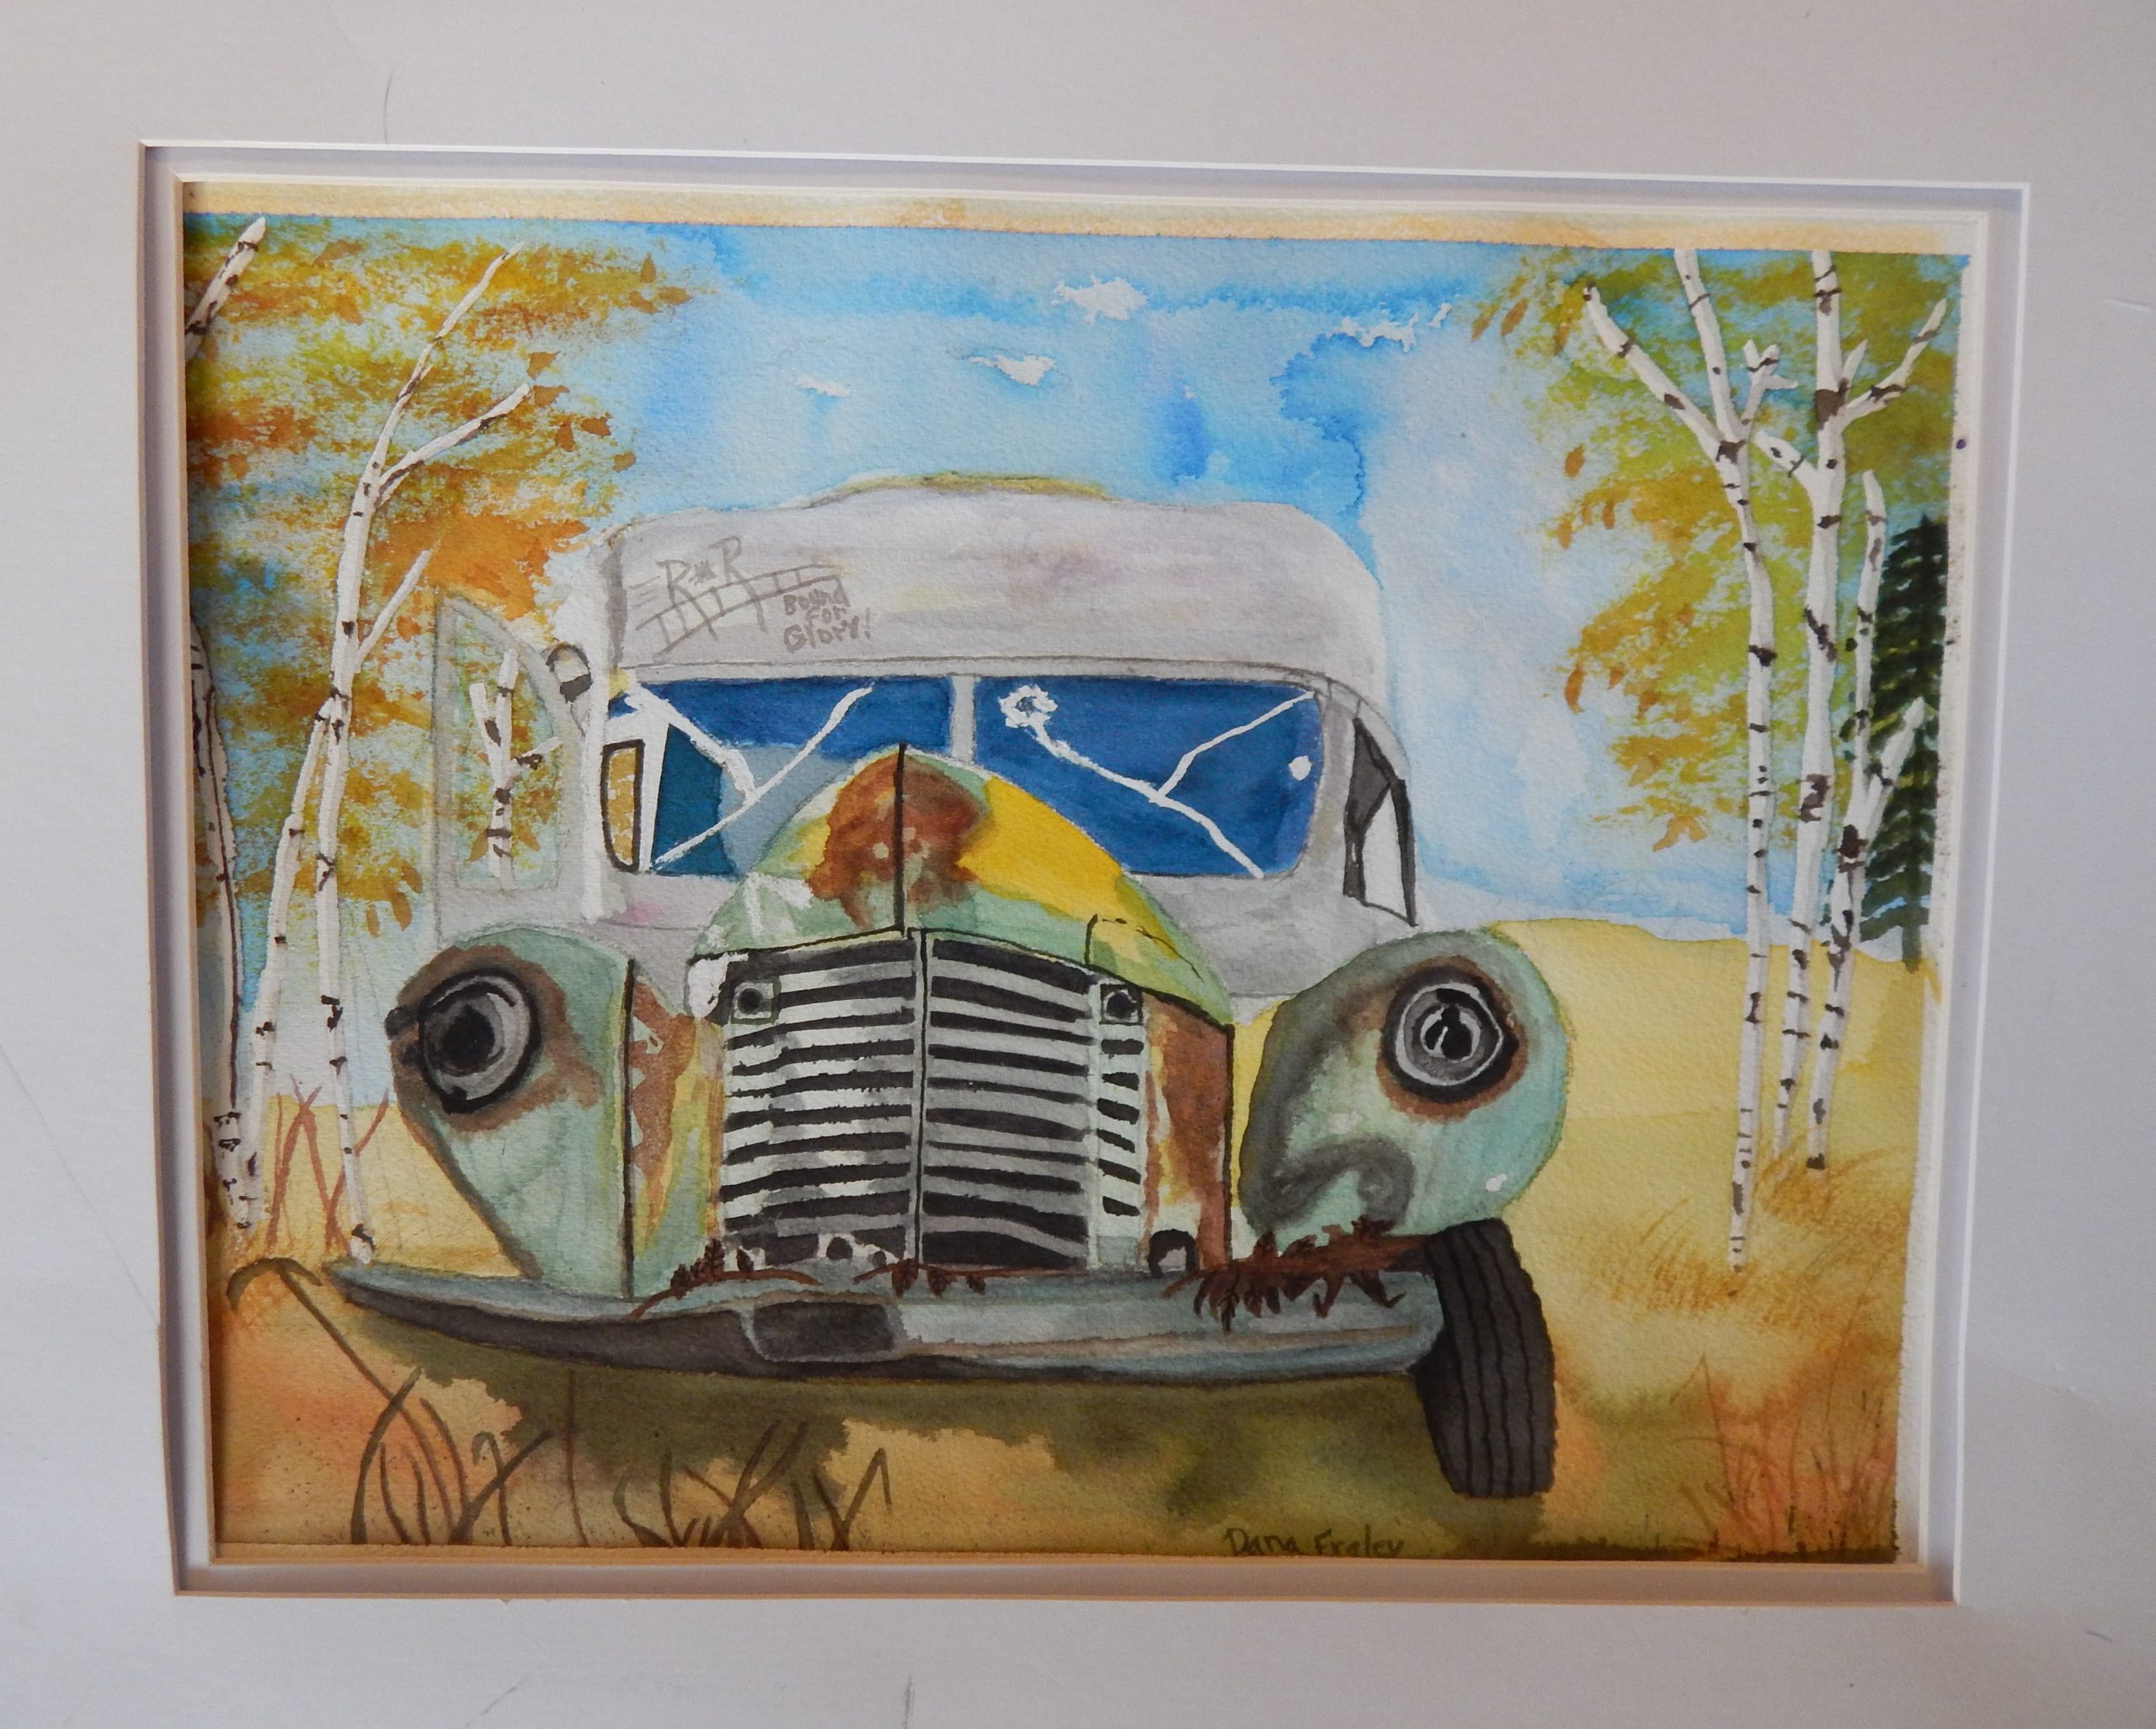 Dana Fraley's Painting of Bus 142